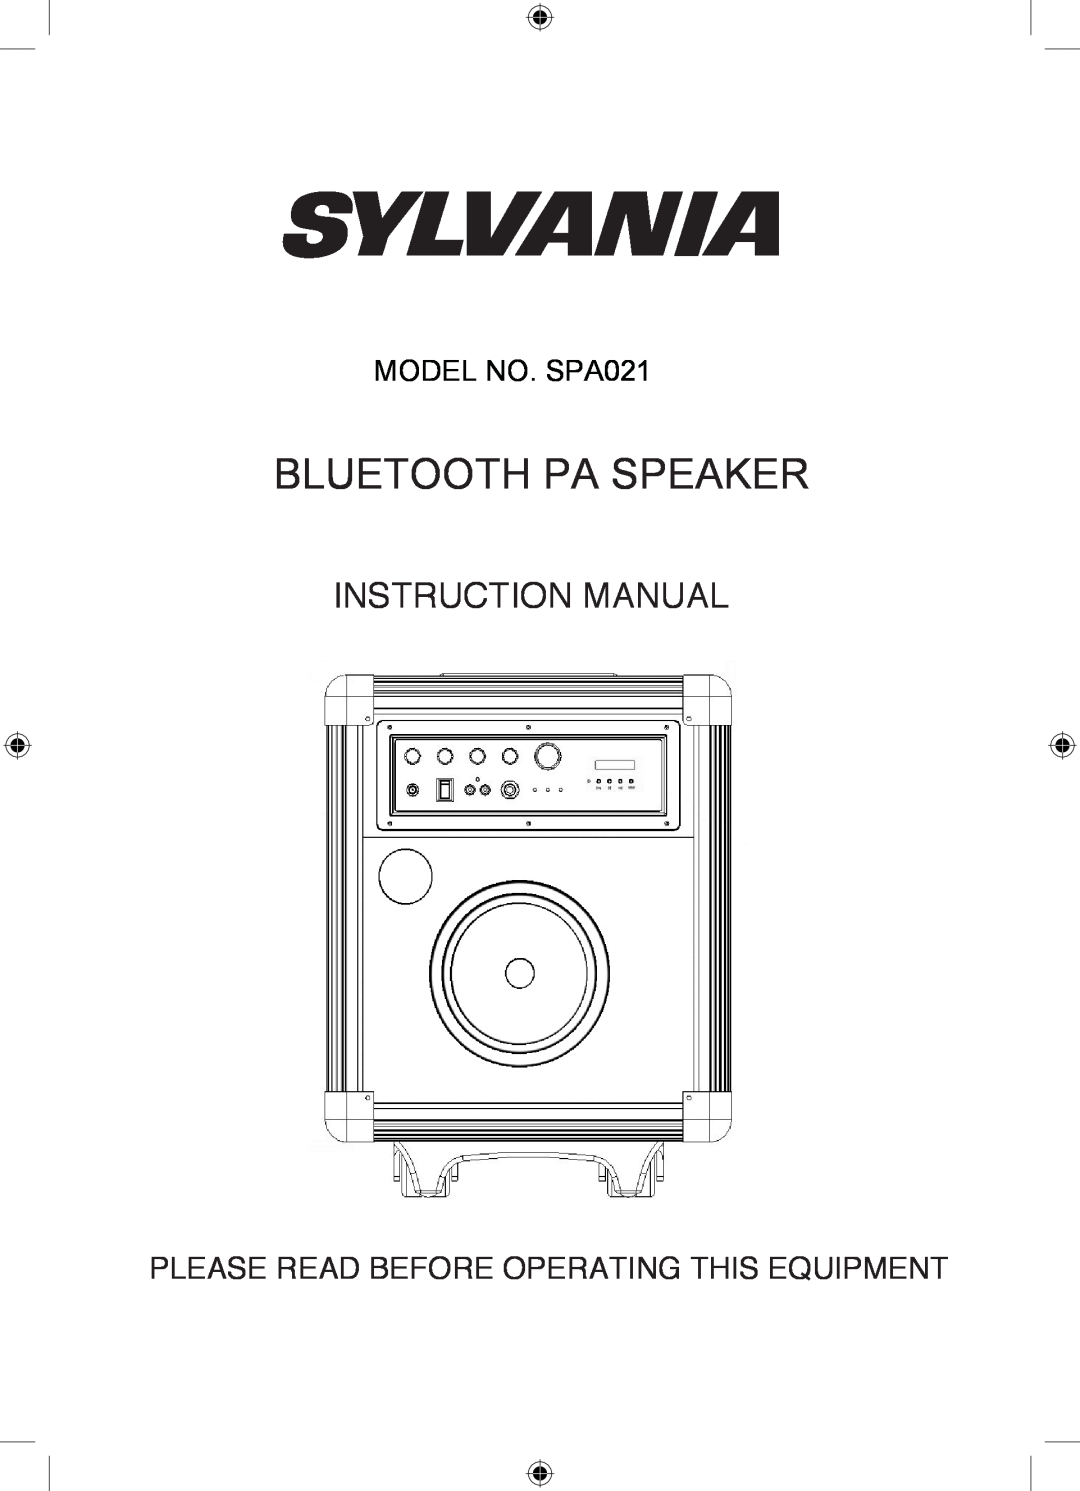 Sylvania instruction manual Bluetooth Pa Speaker, MODEL NO. SPA021, Please Read Before Operating This Equipment 